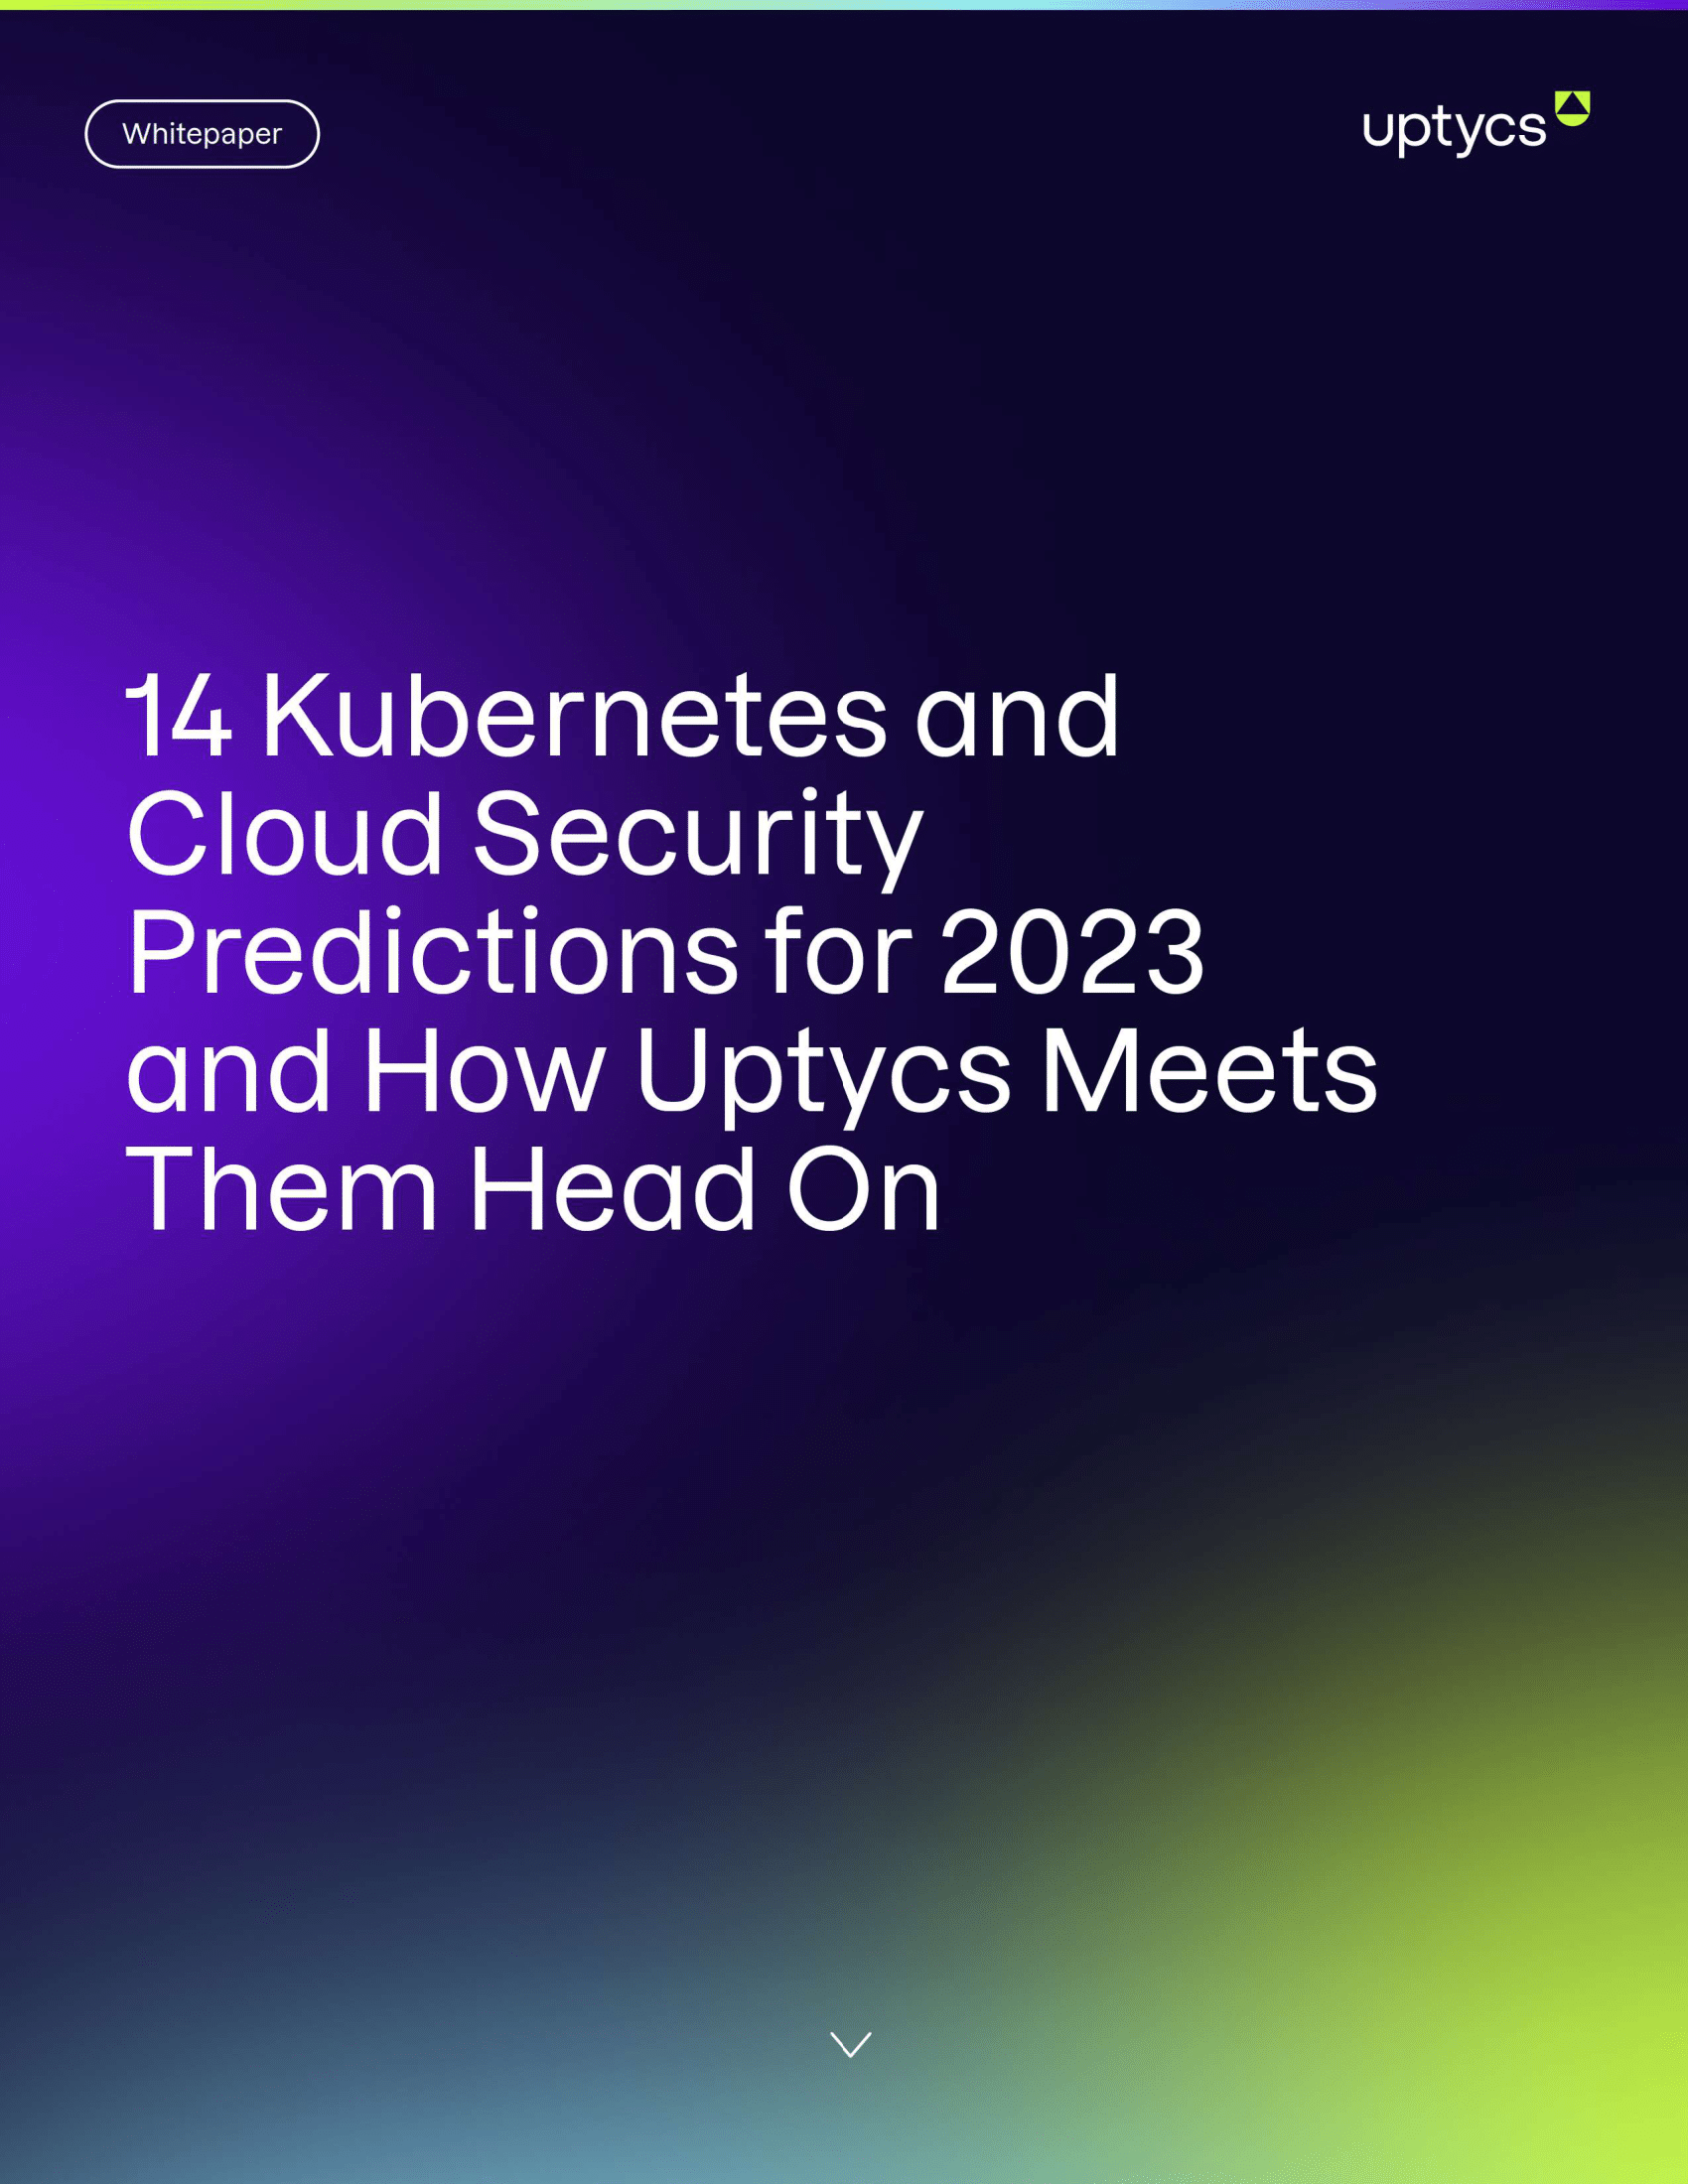 Learn how Uptycs solves the fourteen forecasts Andrew Martin highlights in his recently published Kubernetes (k8s) security predictions for 2023.